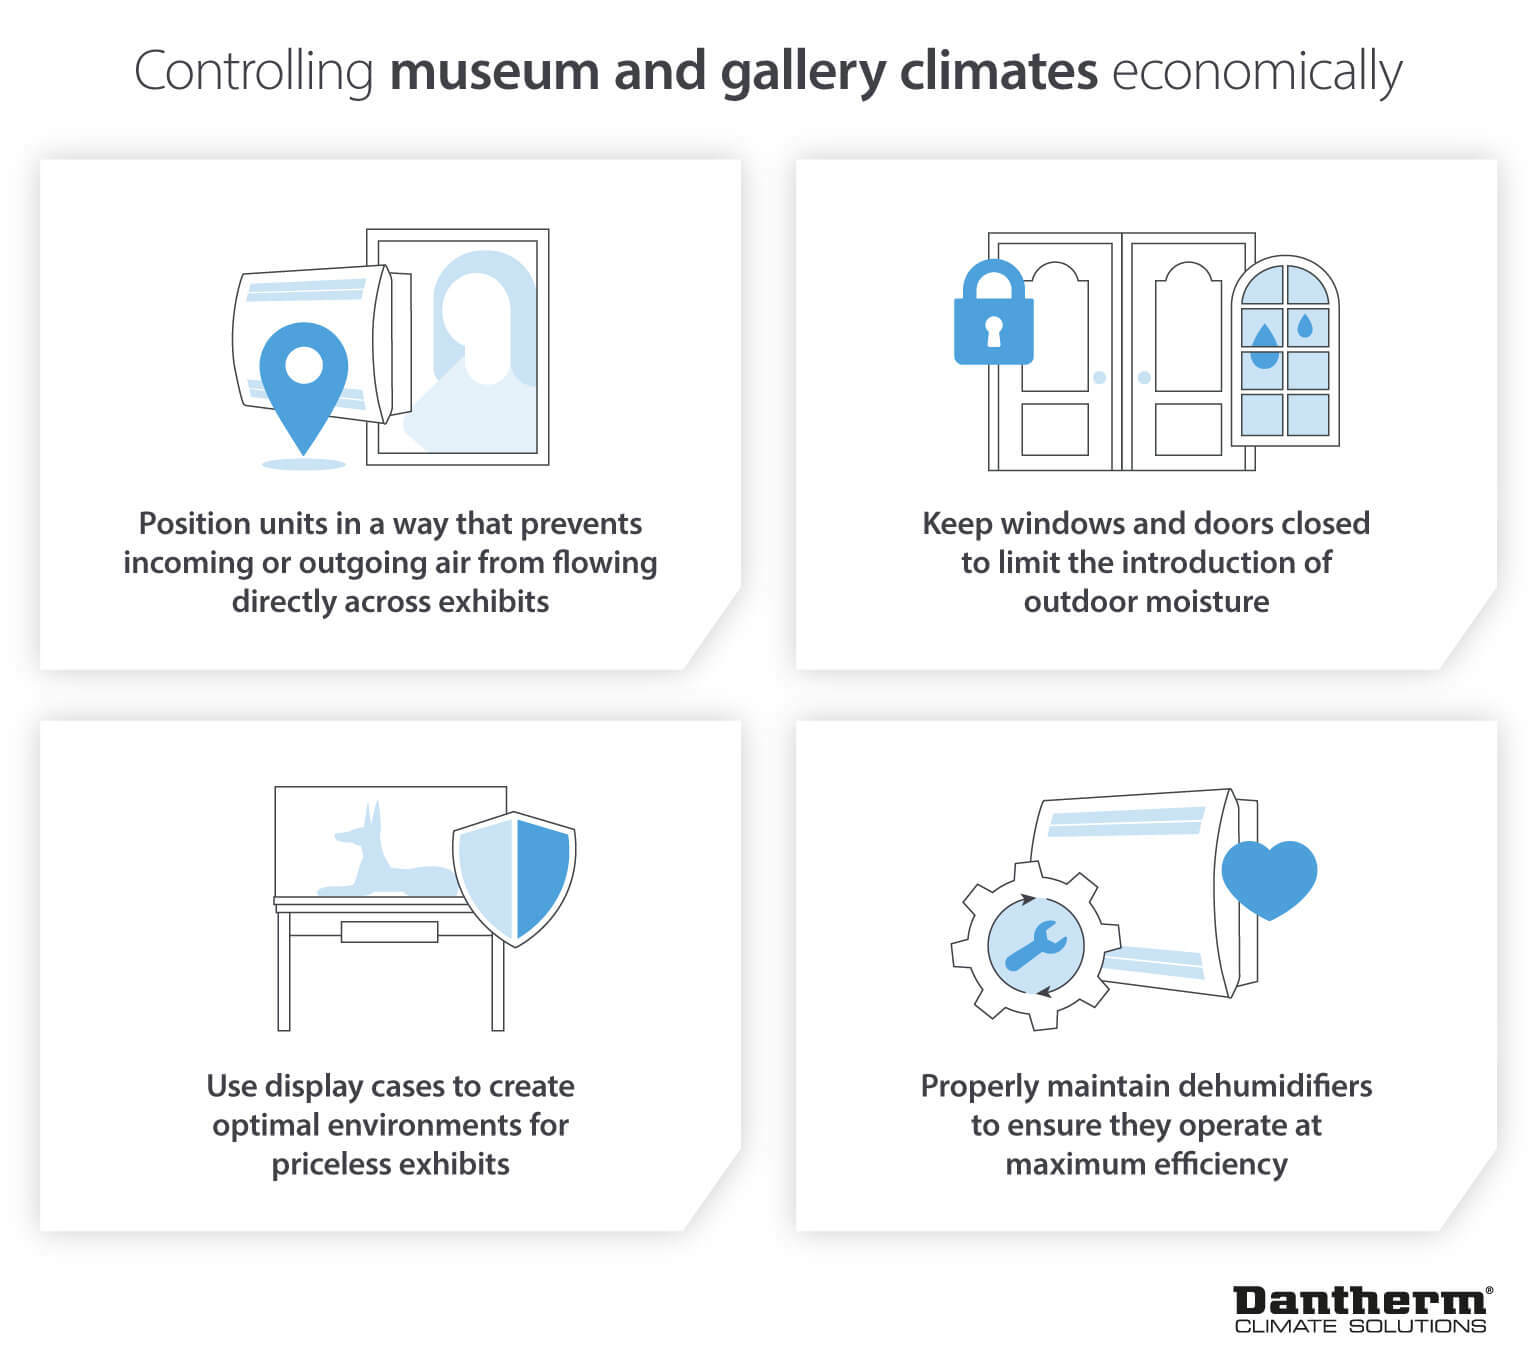 Economical museum and gallery climate control recommendations and advice - Infographic image